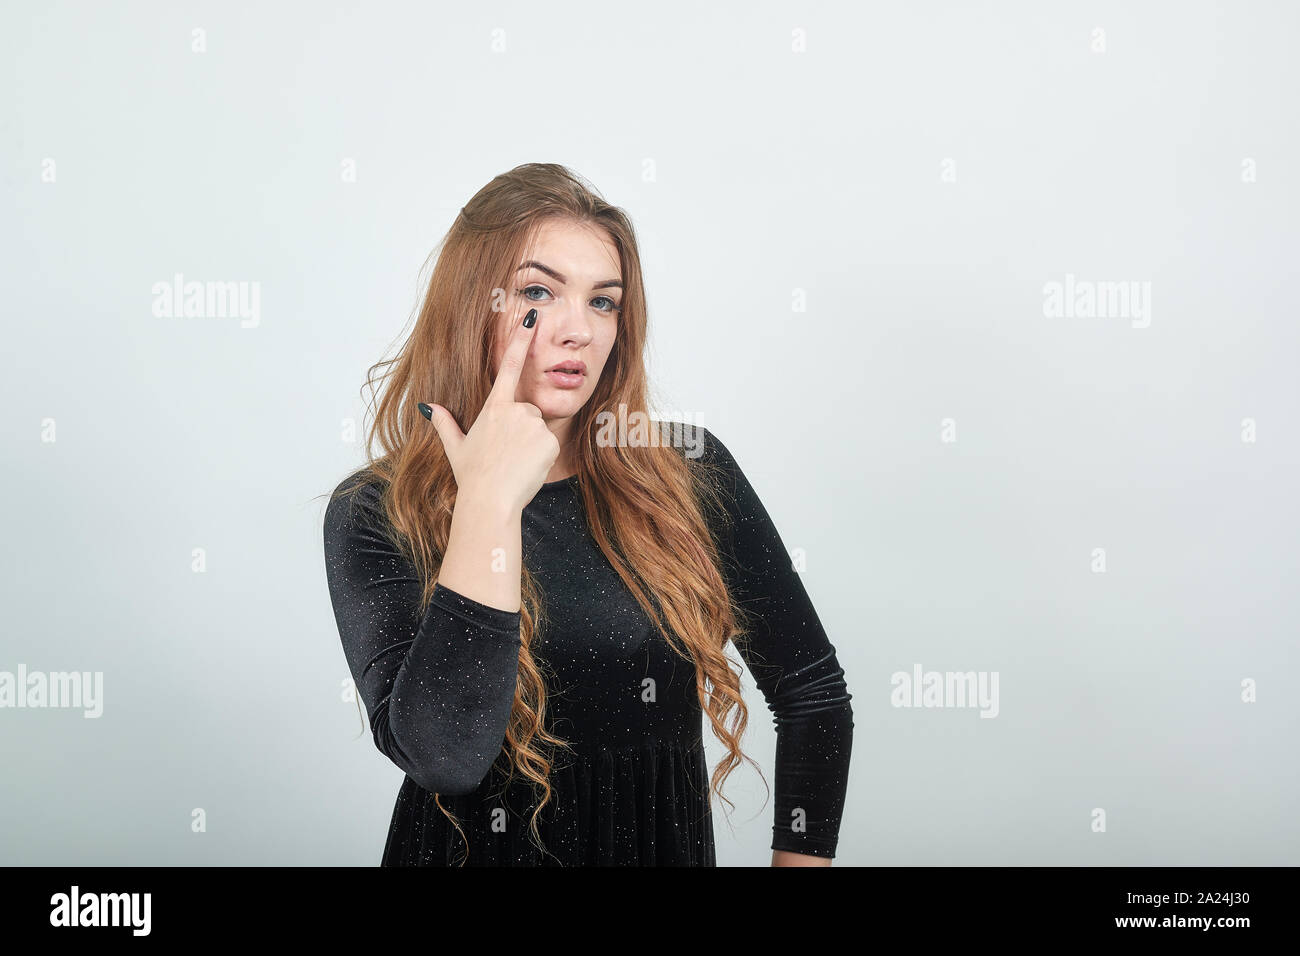 girl brown haired in black dress over isolated white background shows emotions Stock Photo